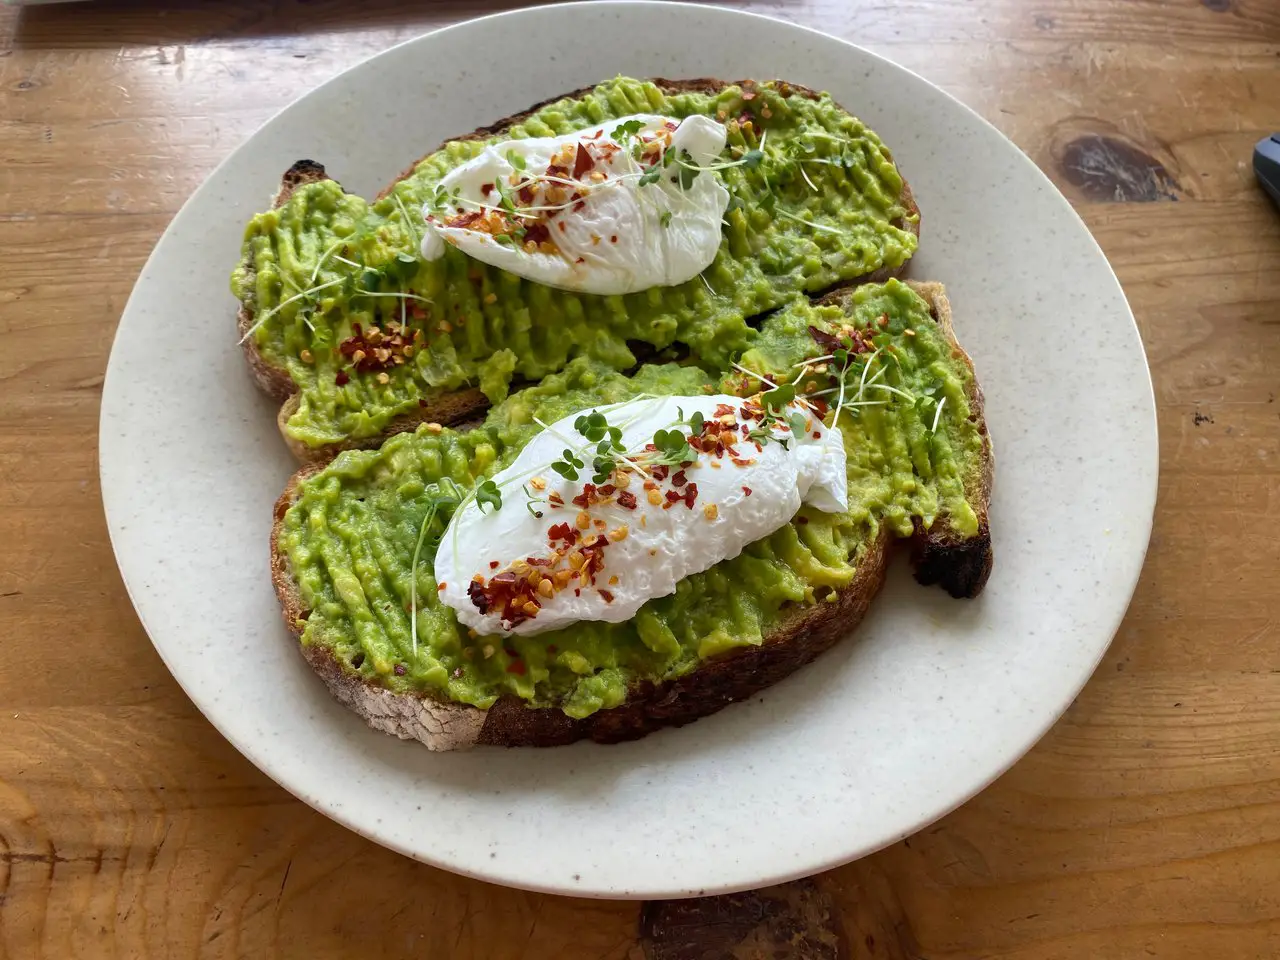 Two slices of avocado toast with poached eggs, one of the most popular dishes for breakfast in Liverpool